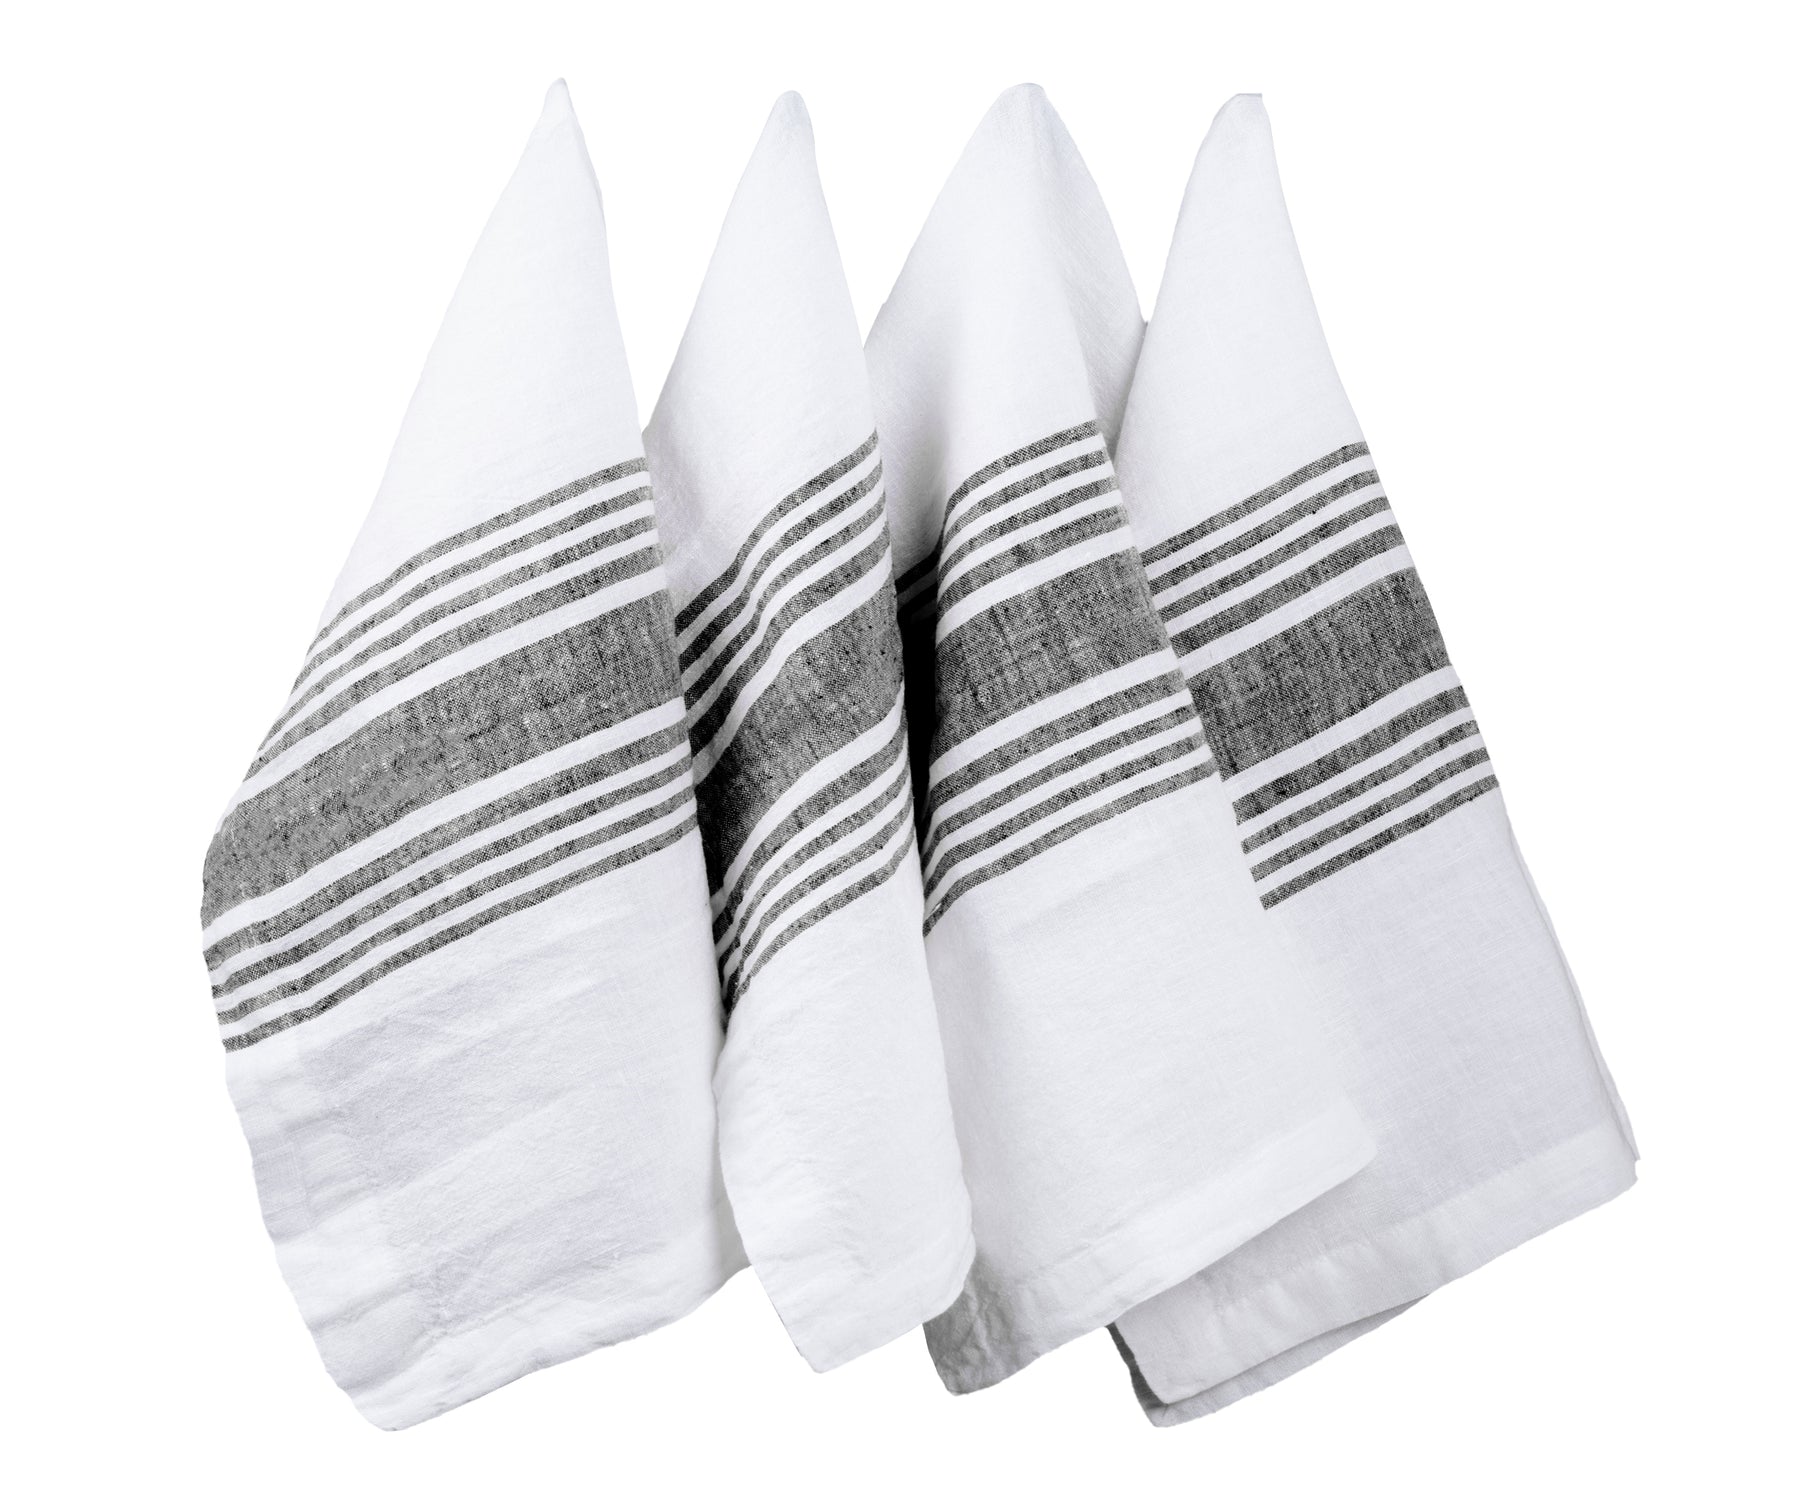 white linen napkins' choice of material depends on the desired level of formality, durability, and convenience.